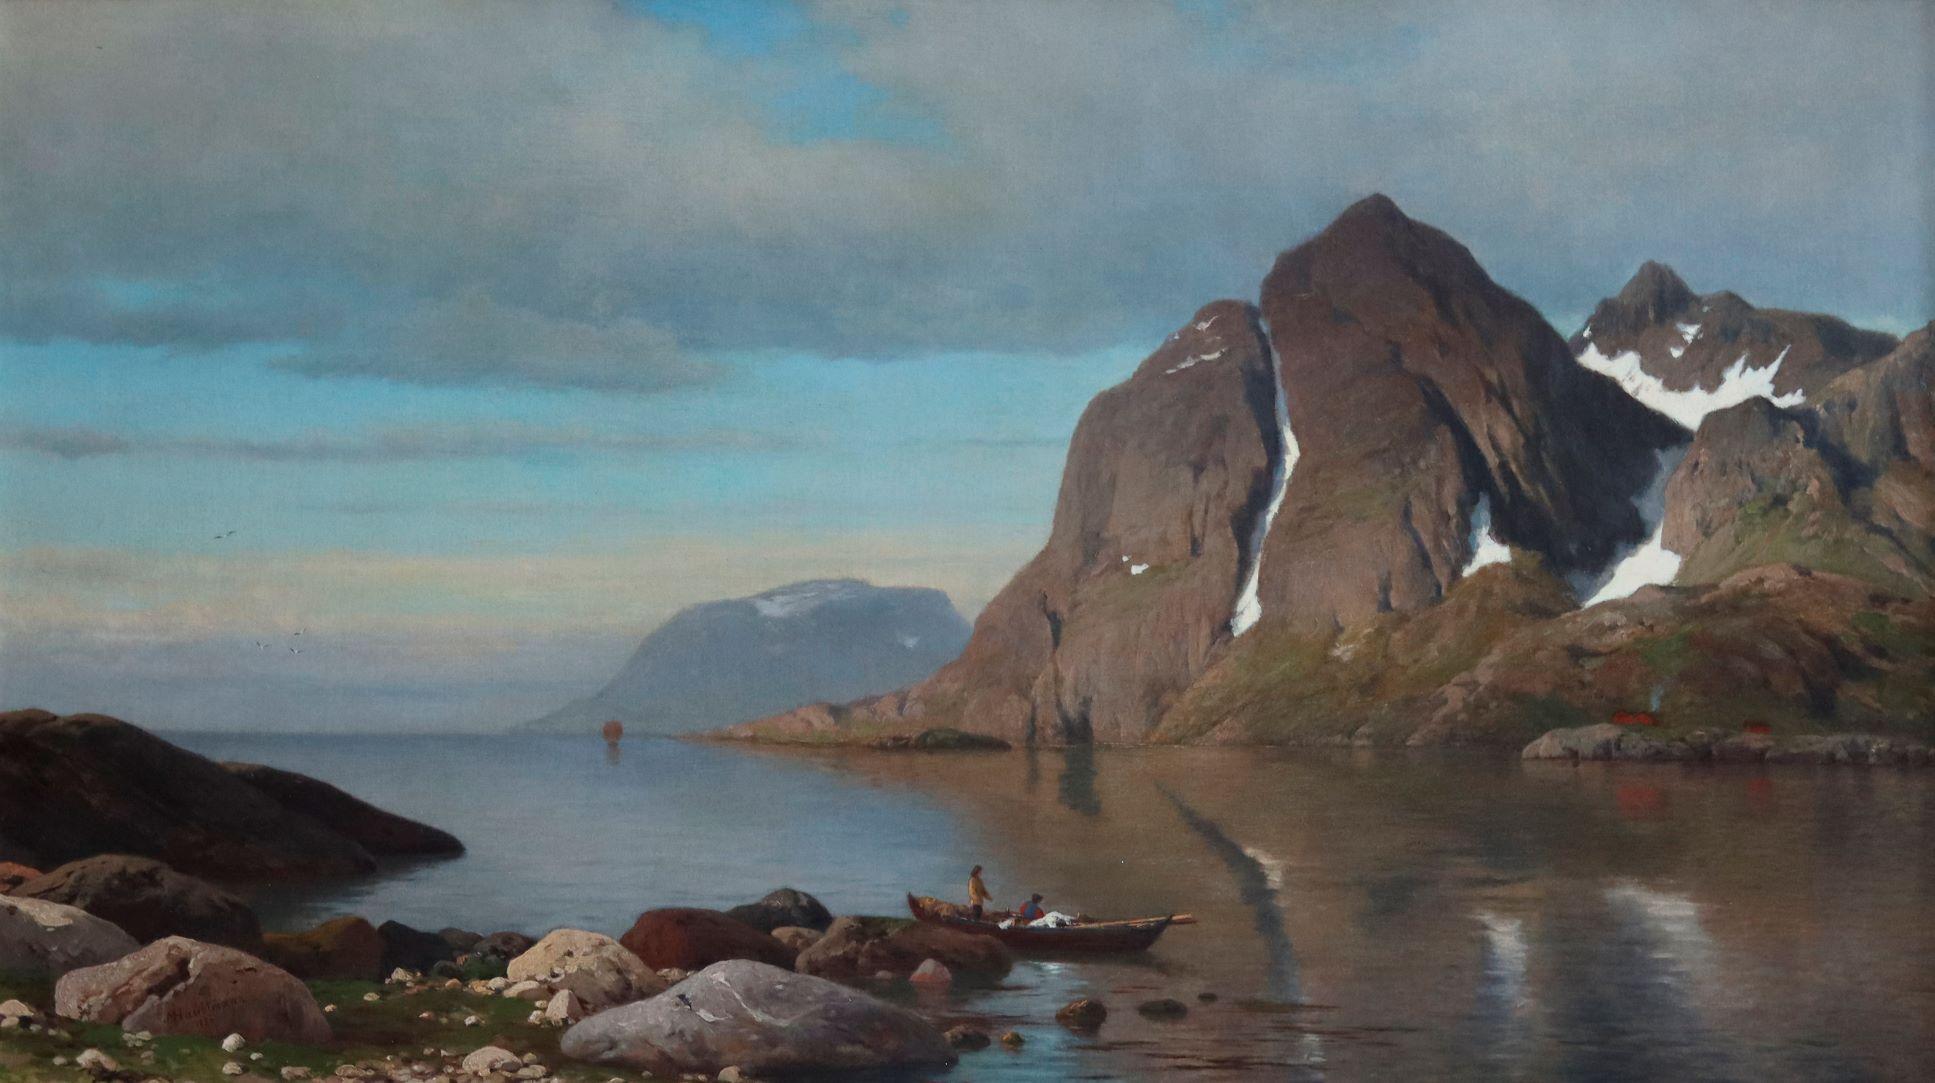 The North Cape, Norway                                                           - Painting by Michael Haubtmann